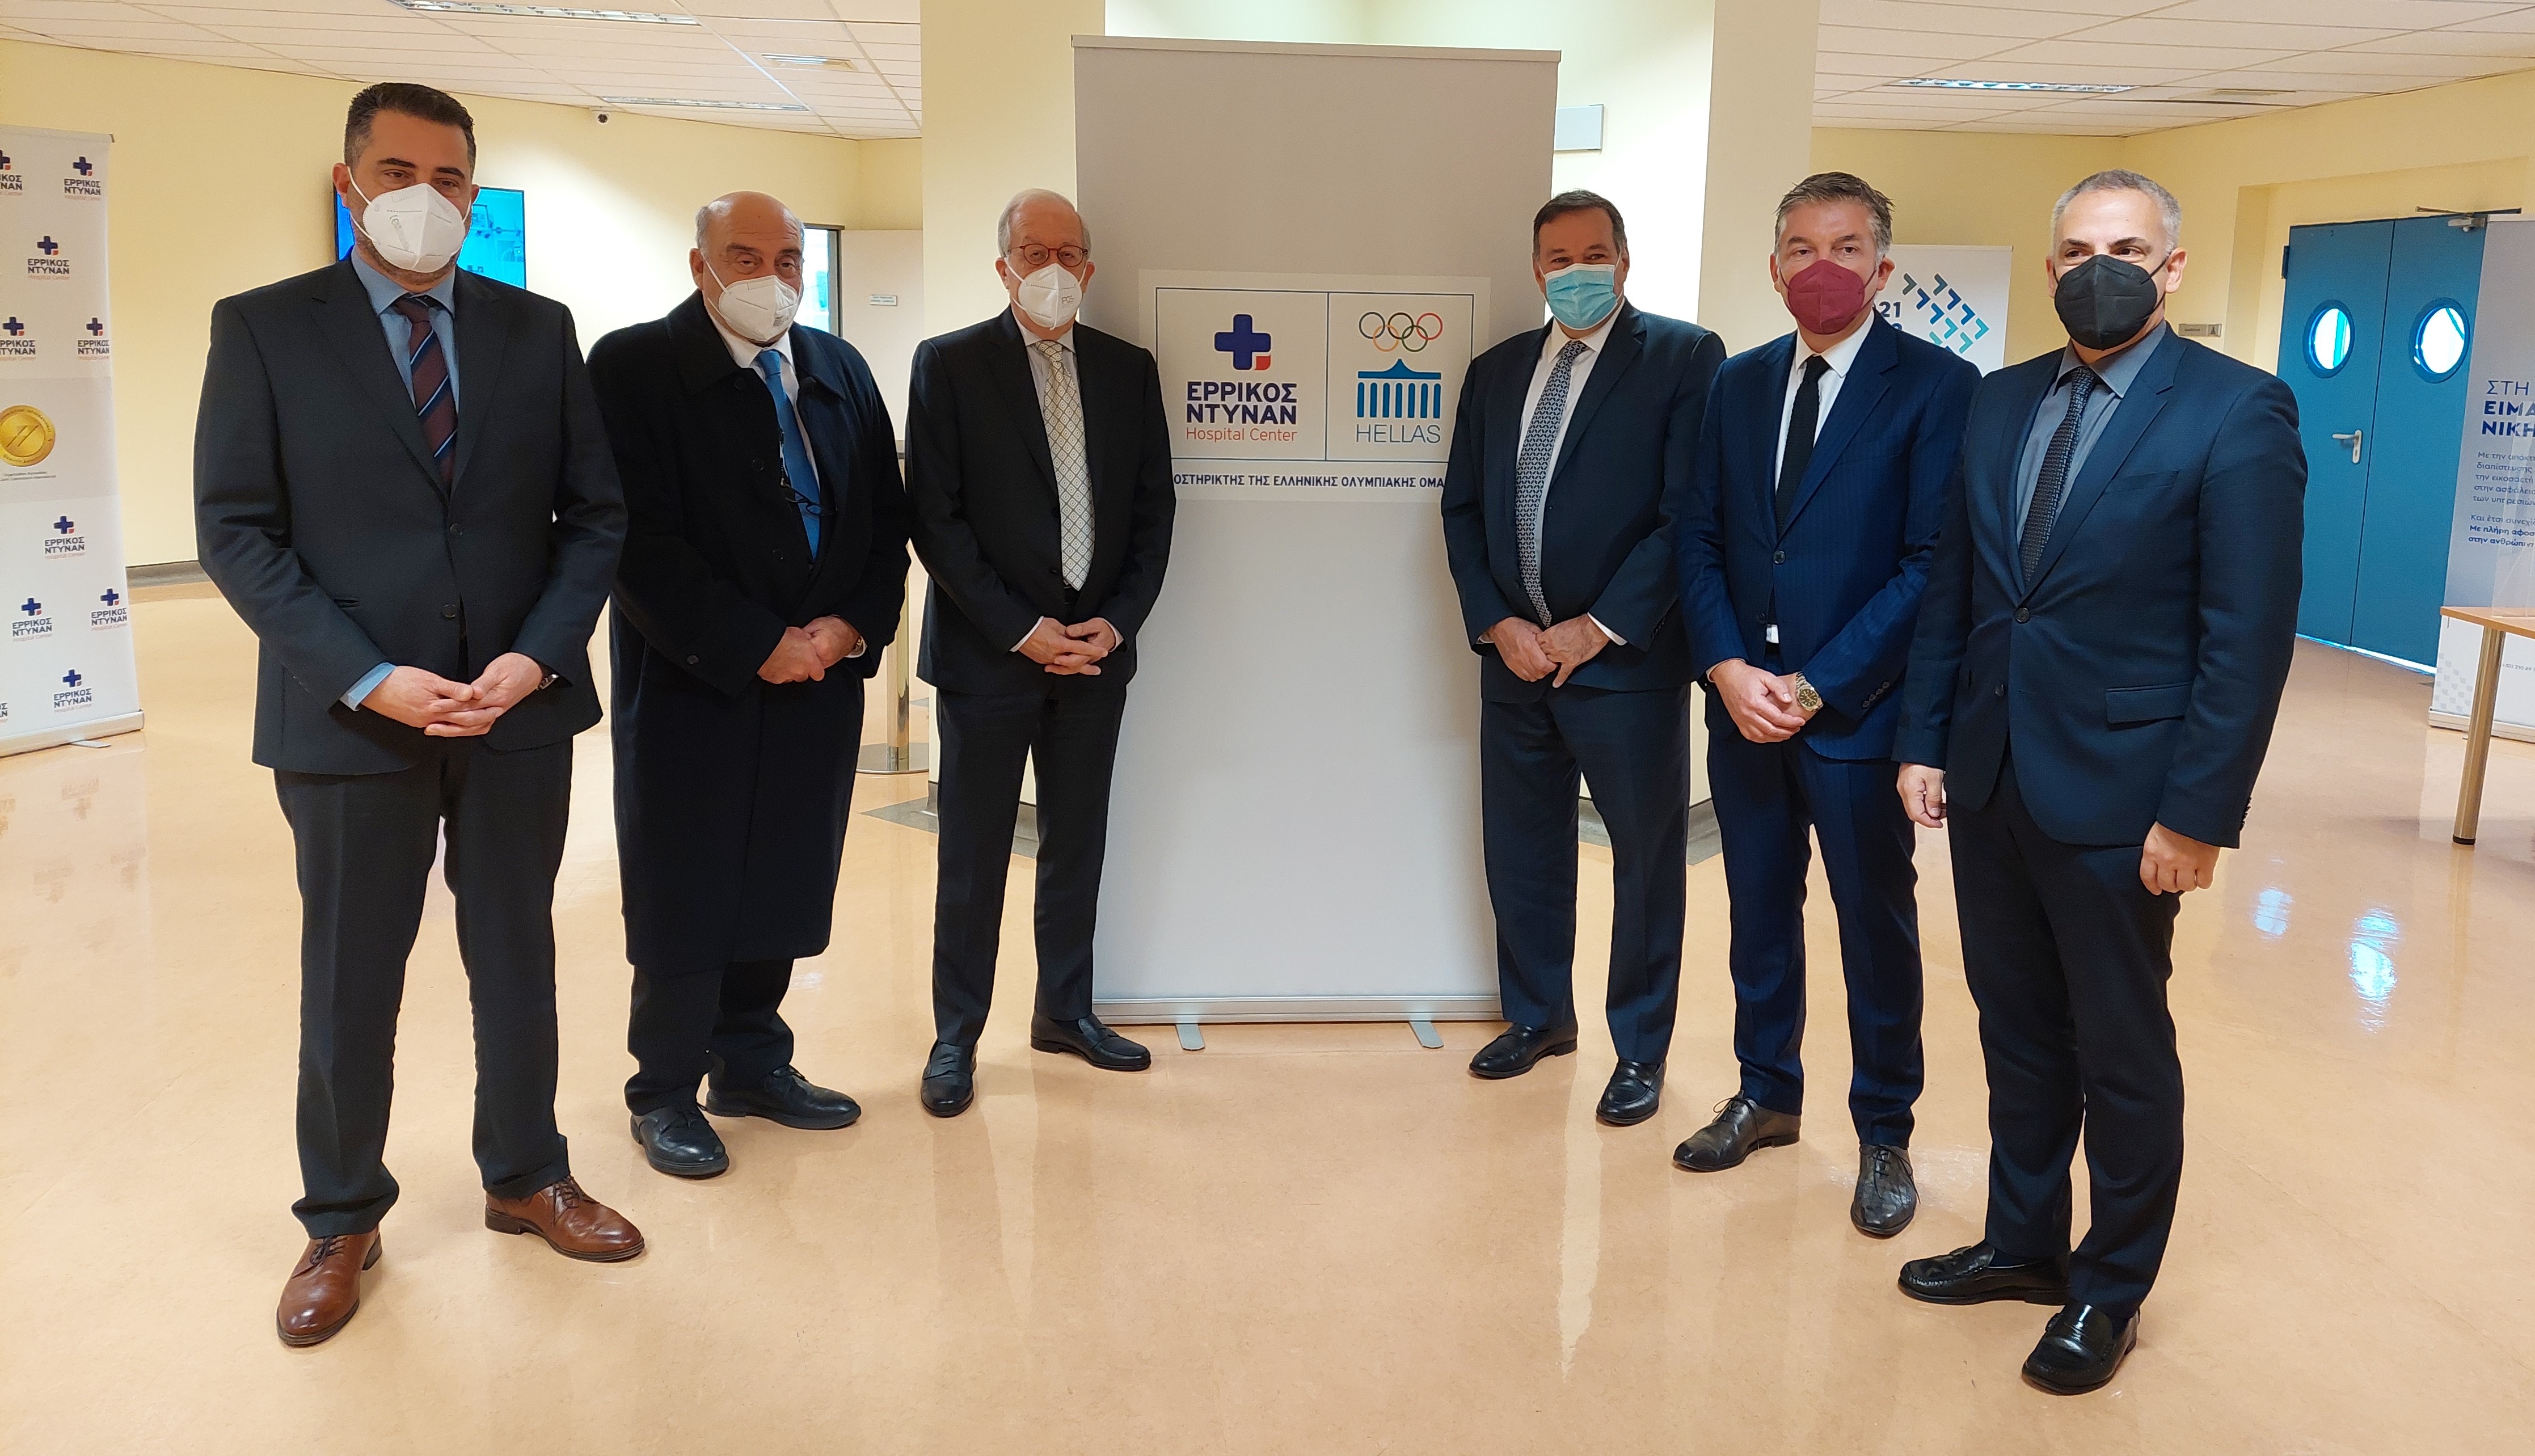 The Hellenic Olympic Committee and Henry Dunant Hospital Center together again on the road to Paris 2024